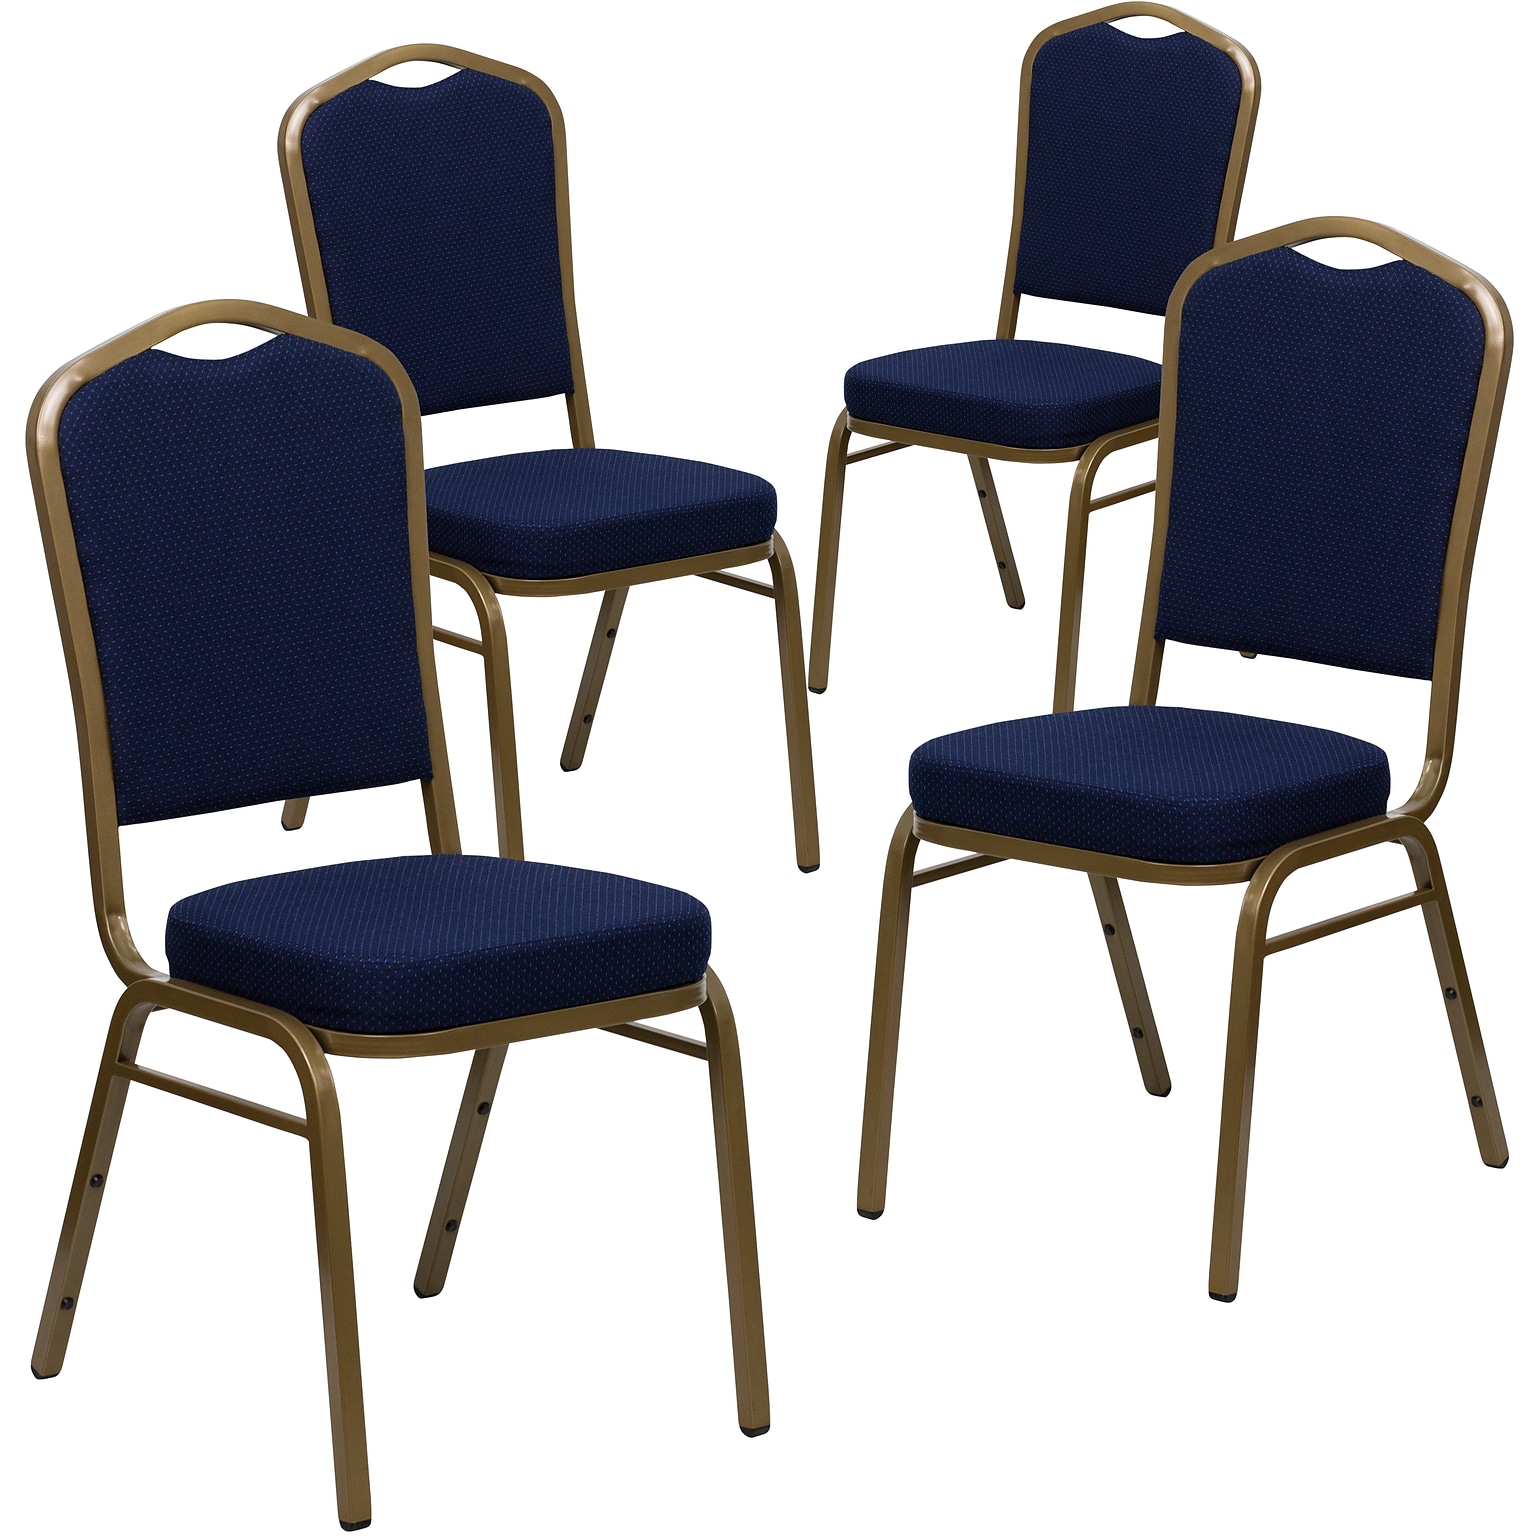 Flash Furniture HERCULES Series Fabric Banquet Stacking Chair, Navy Blue Patterned/Gold Frame, 4 Pack (4FDC01AG2056)